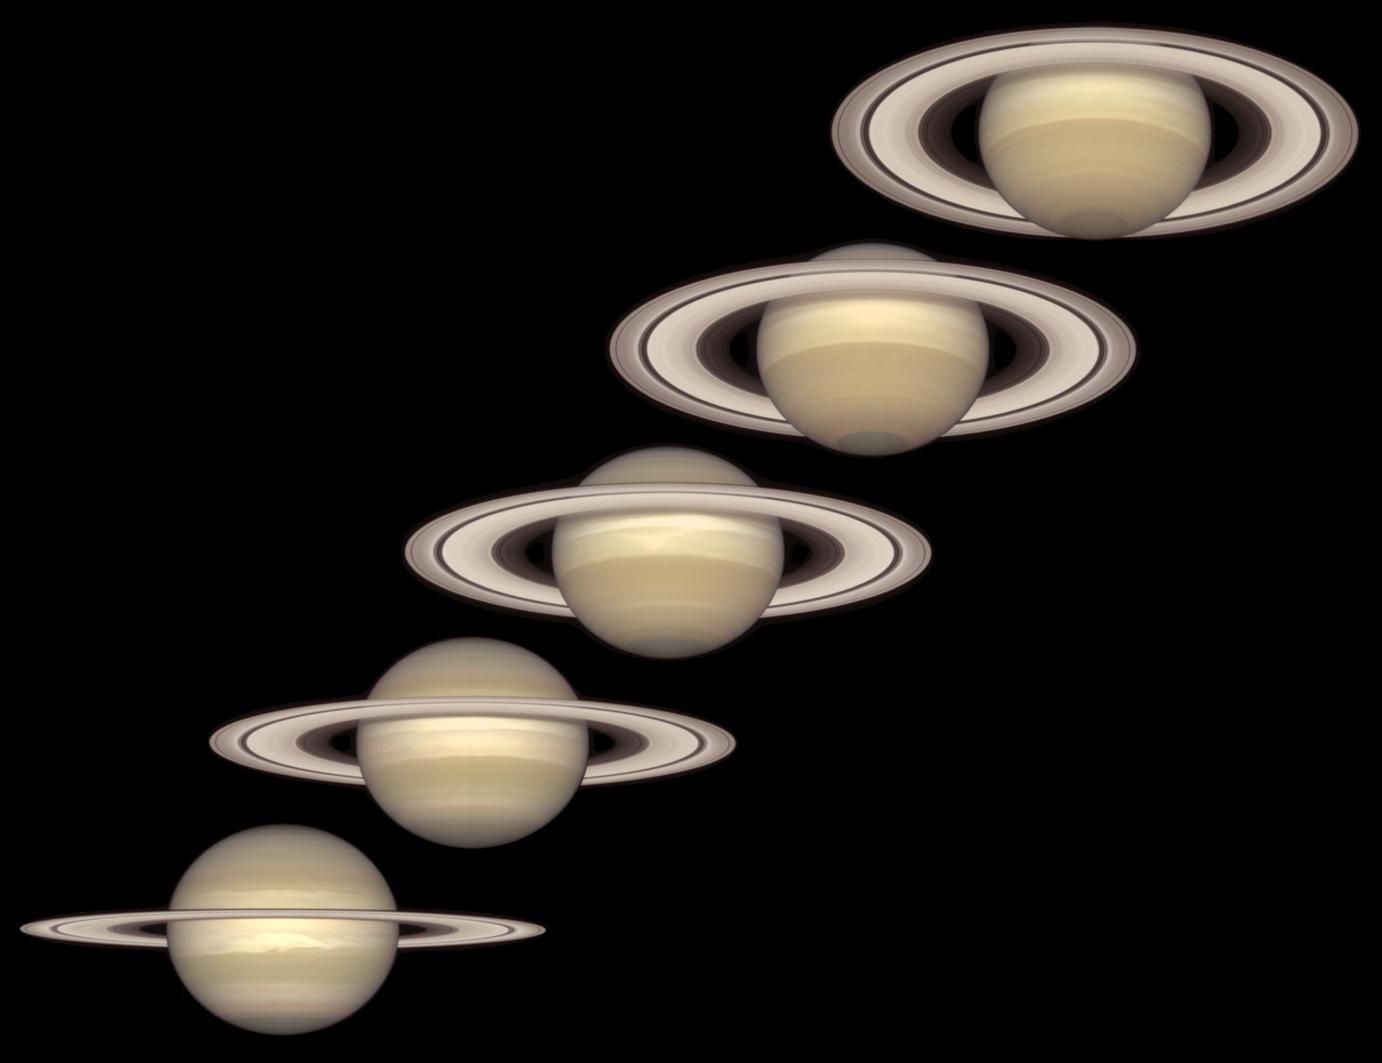 Five images of Saturn from lower left to upper right with each image showing Saturn and its rings tilted at different amounts.